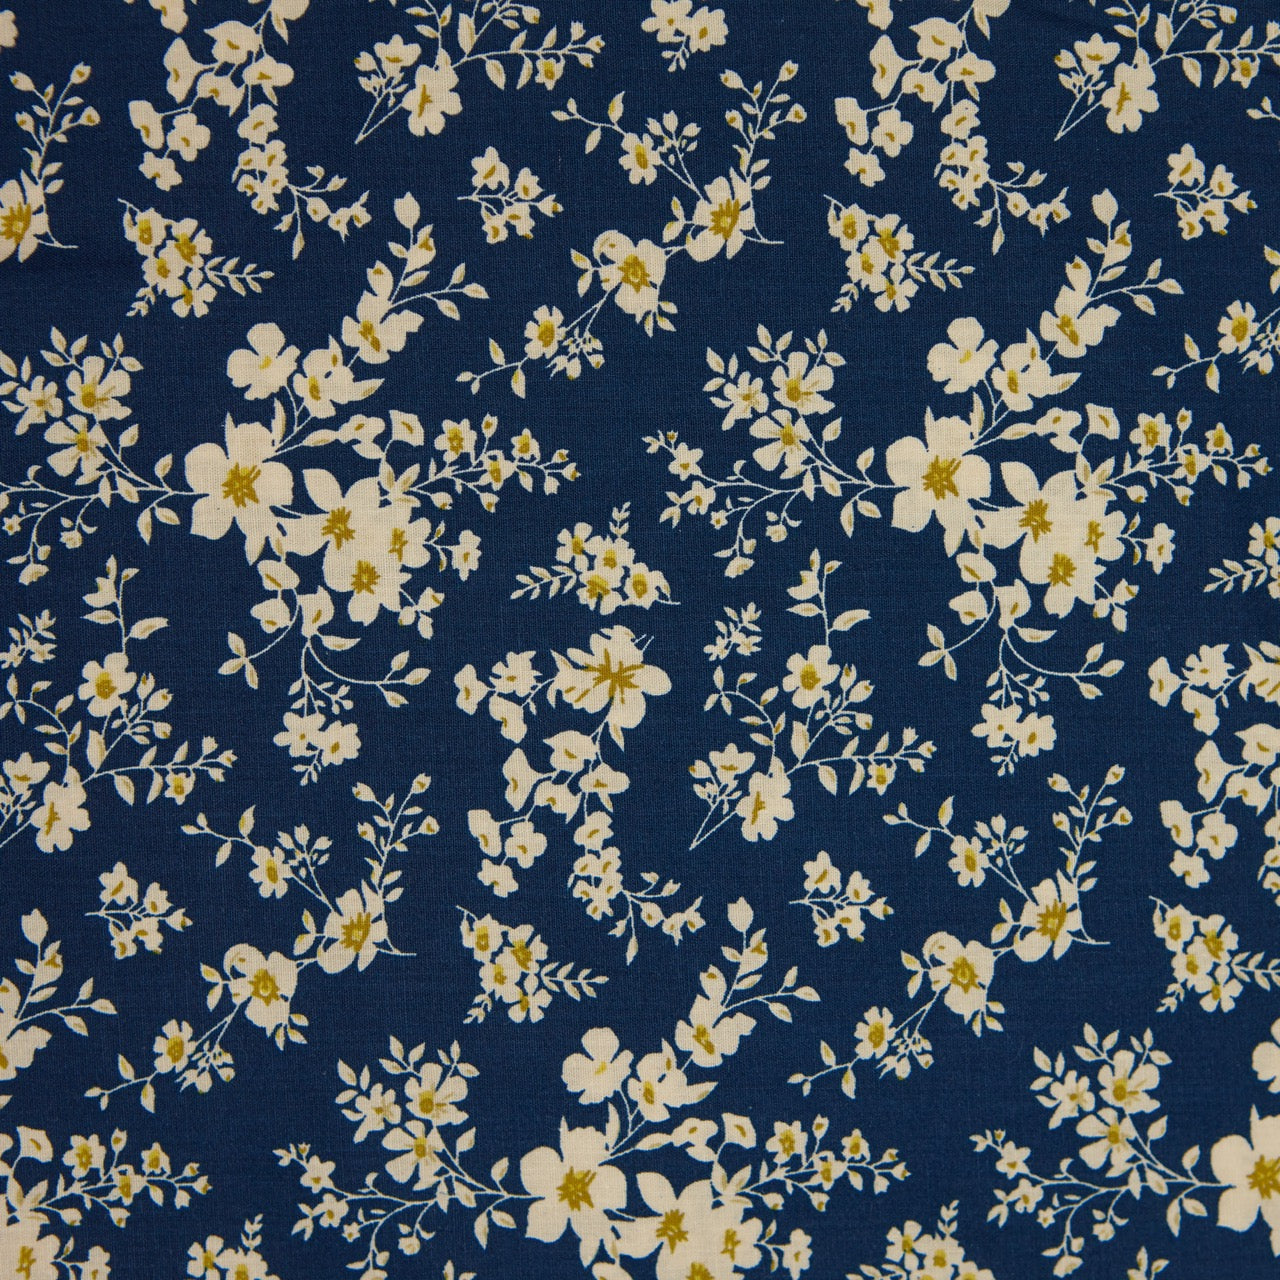 Cotton Floral - Calico - Navy (detail)